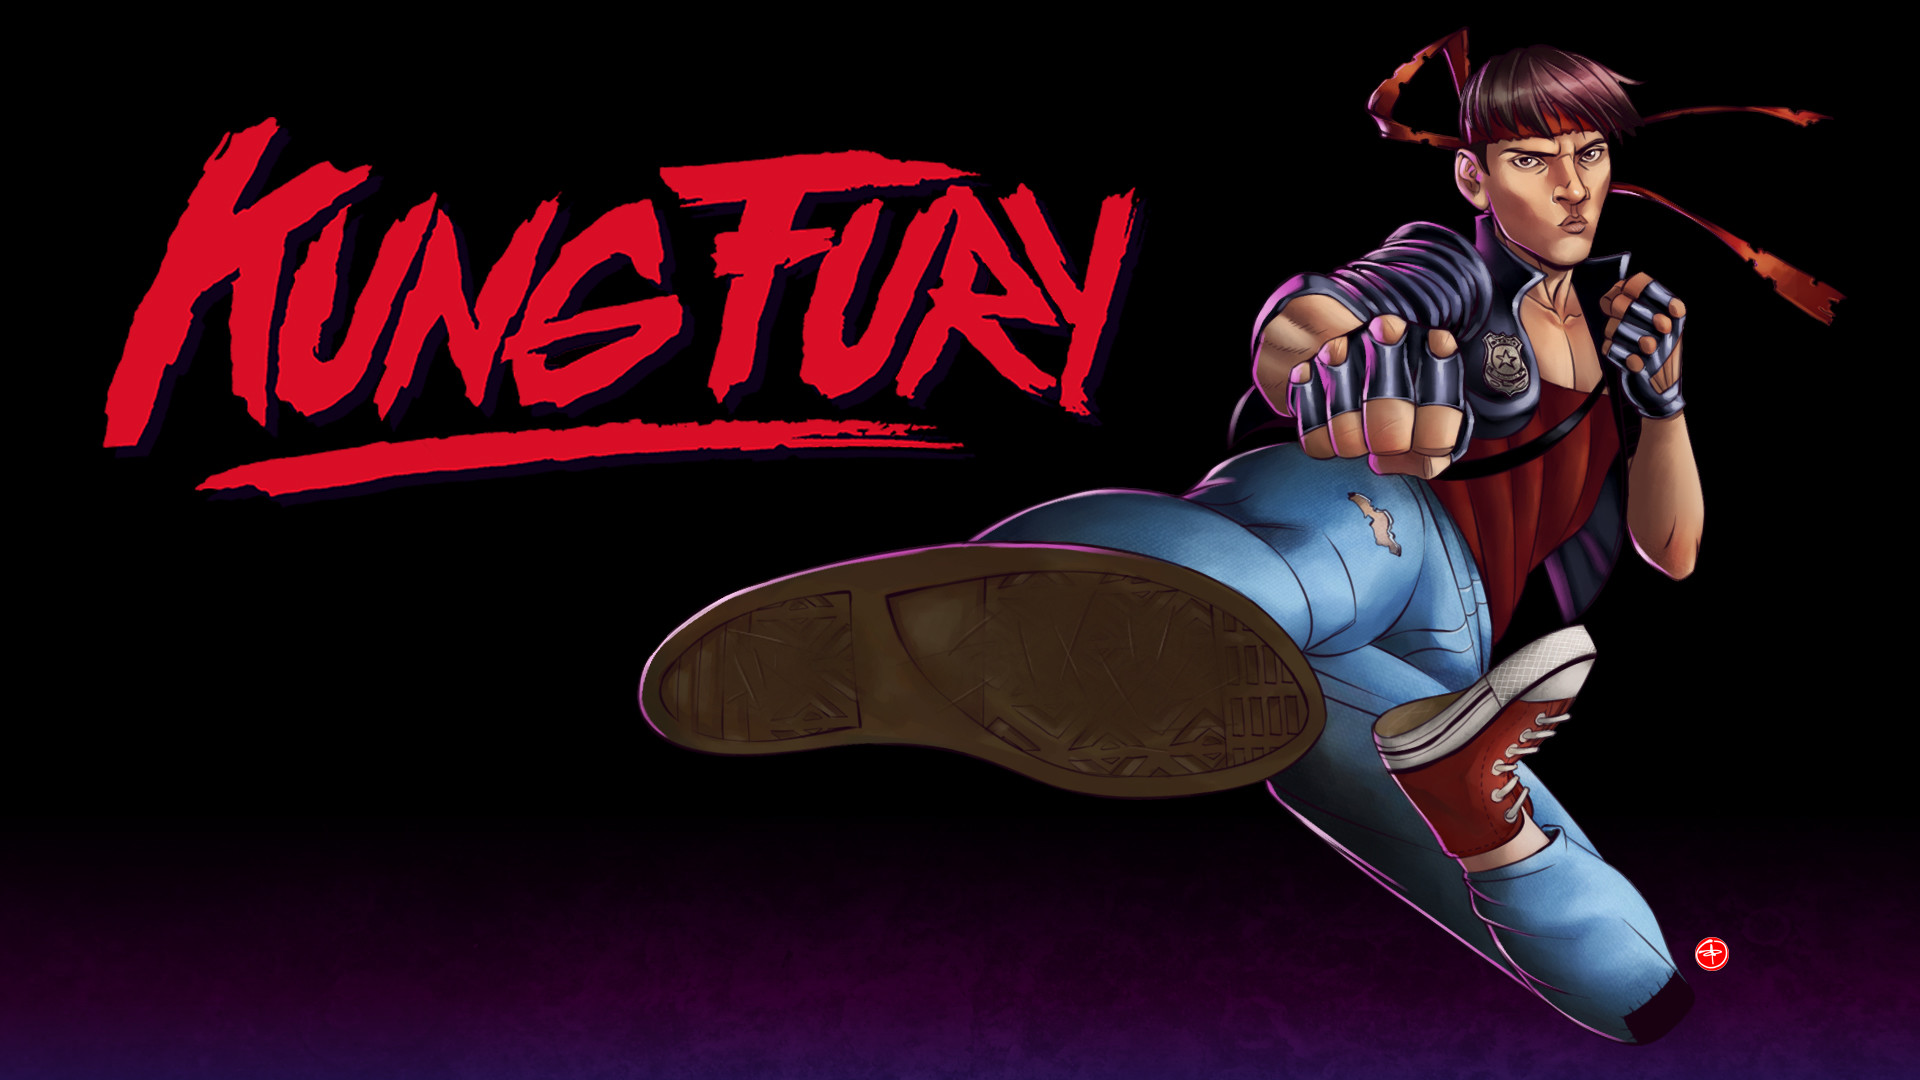 1920x1080 Kung Fury by roy7zen Kung Fury by roy7zen